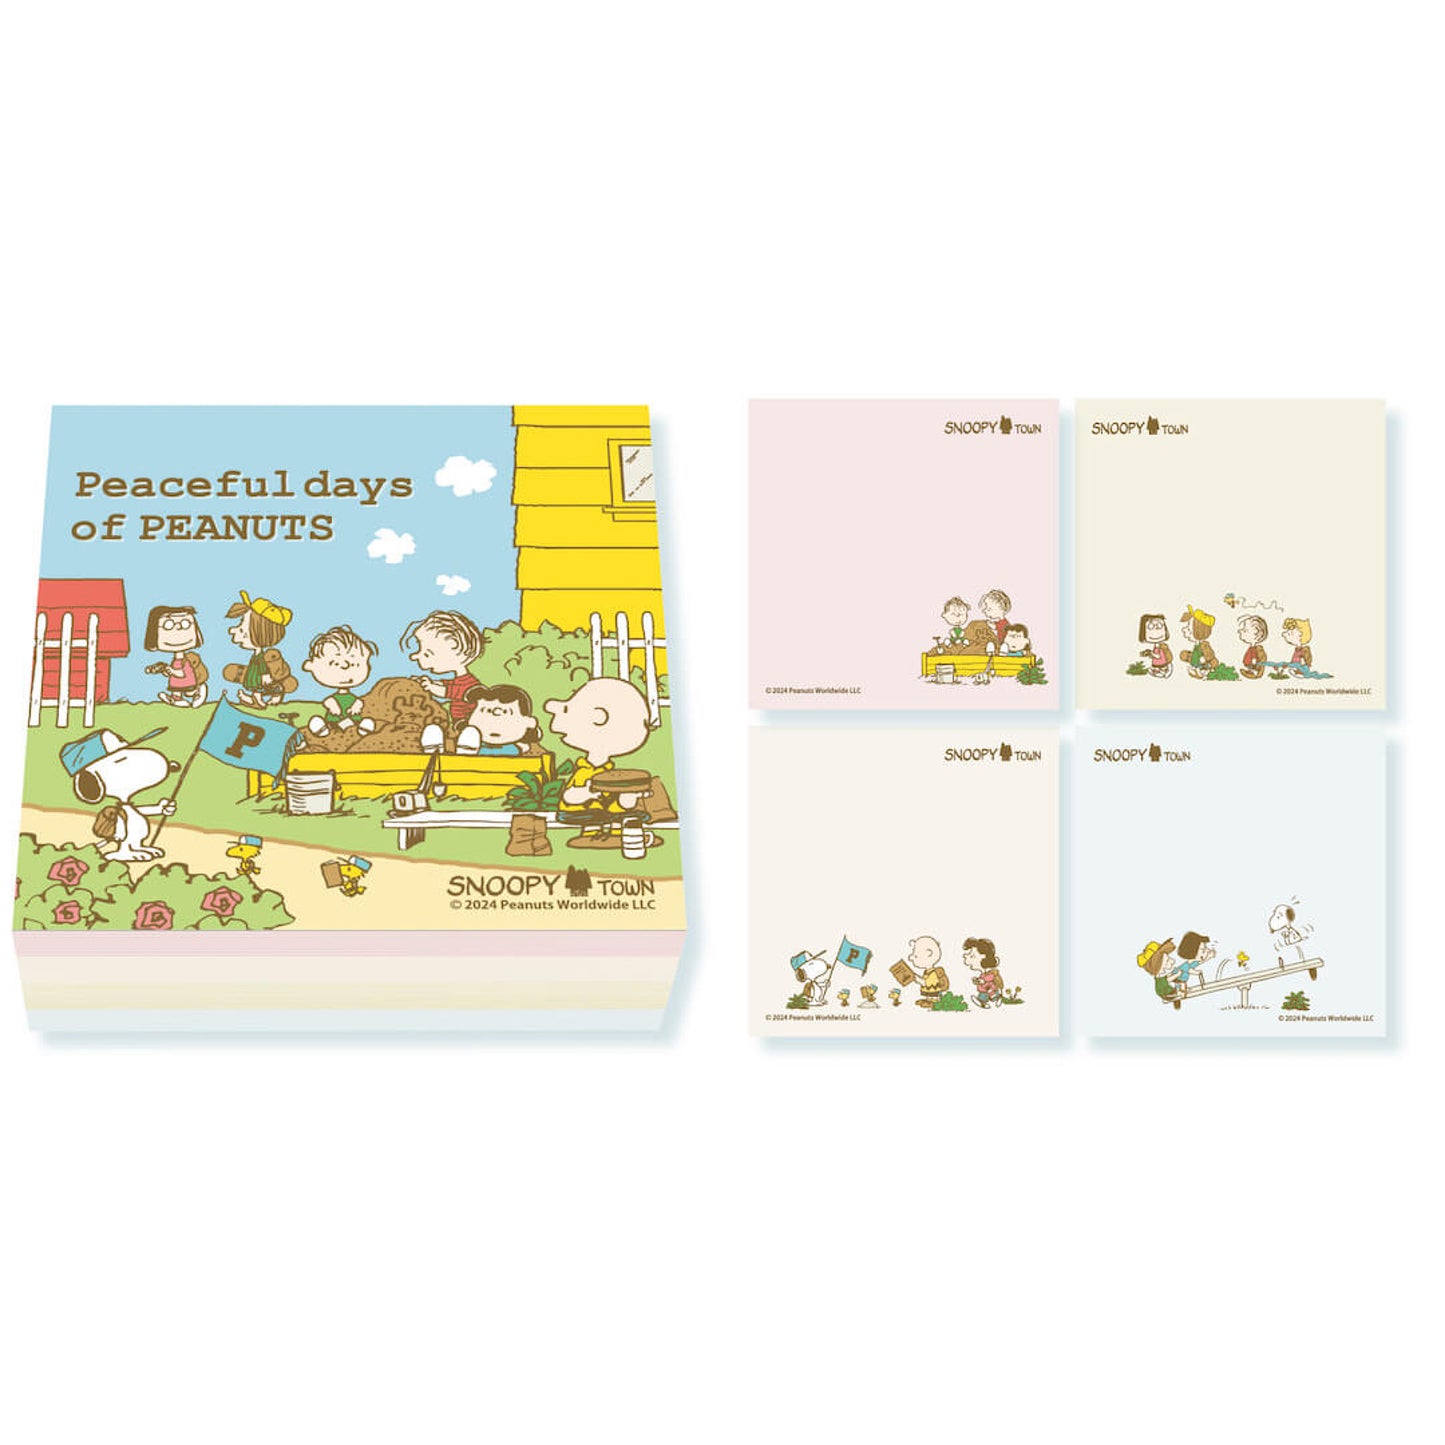 【Pre-order】SNOOPY TOWN Limited "Peaceful days of PEANUTS" - Stationery